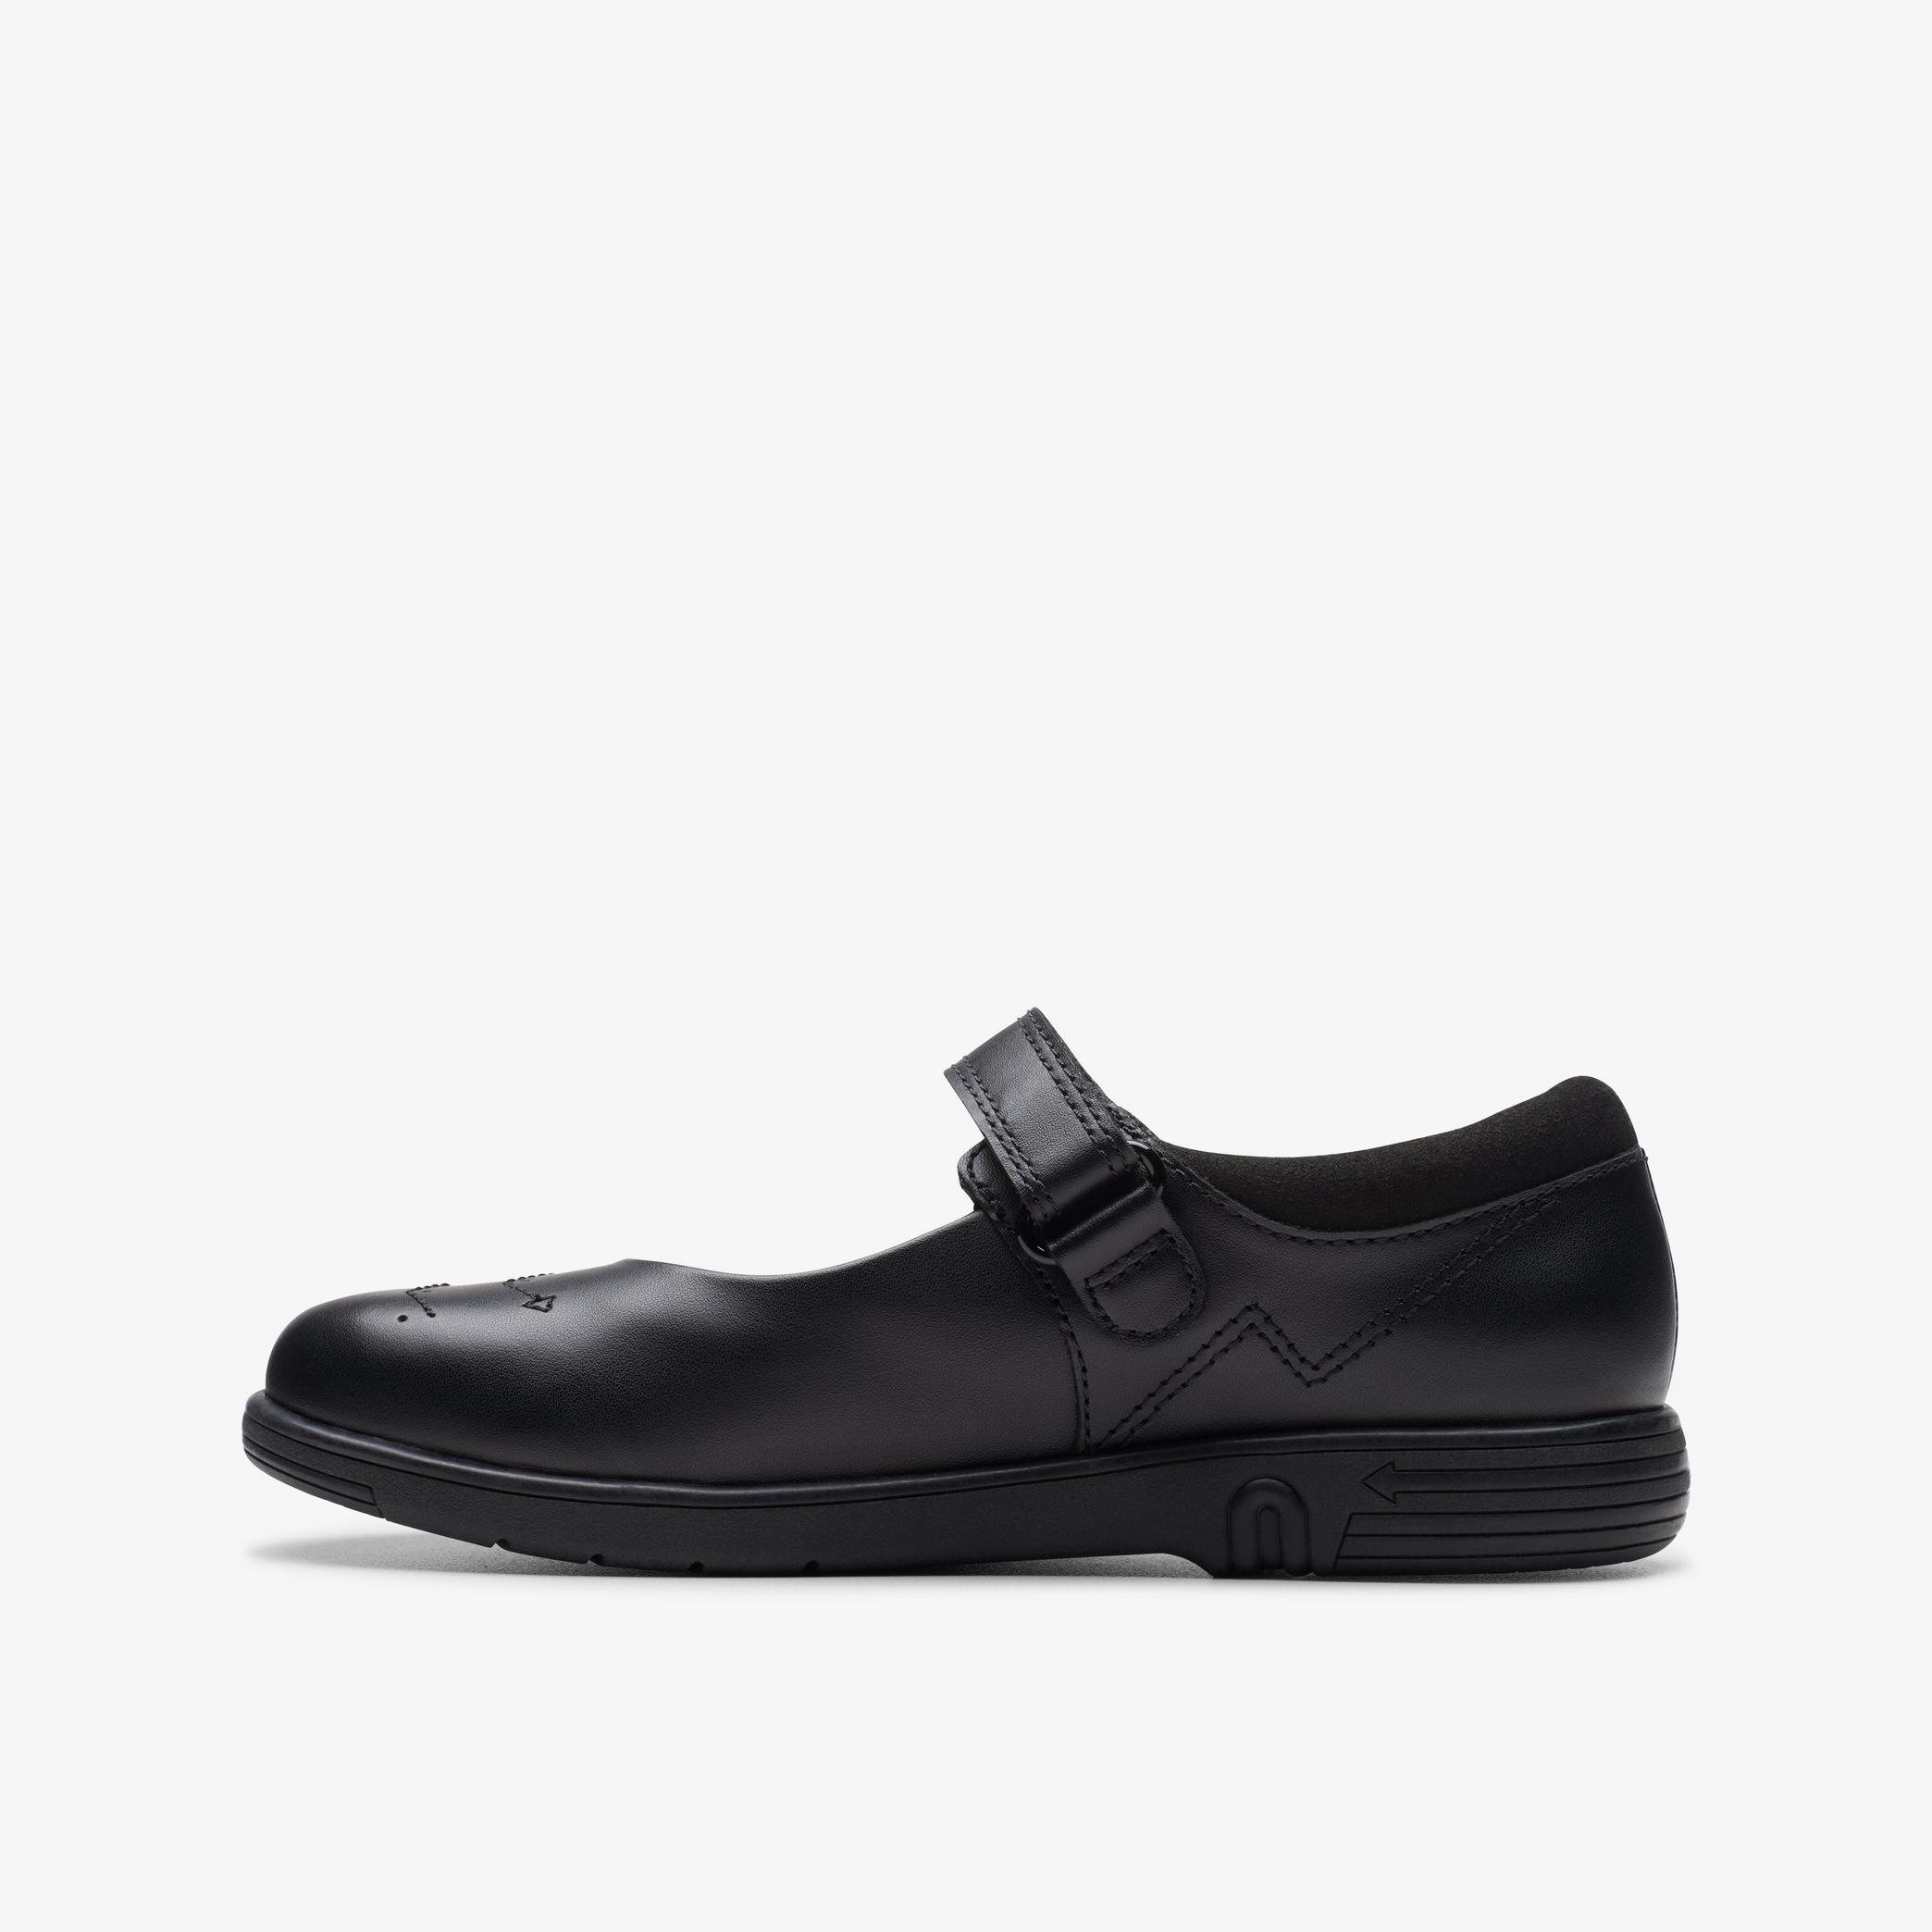 Jazzy Jig Kid Black Leather Shoes, view 2 of 6